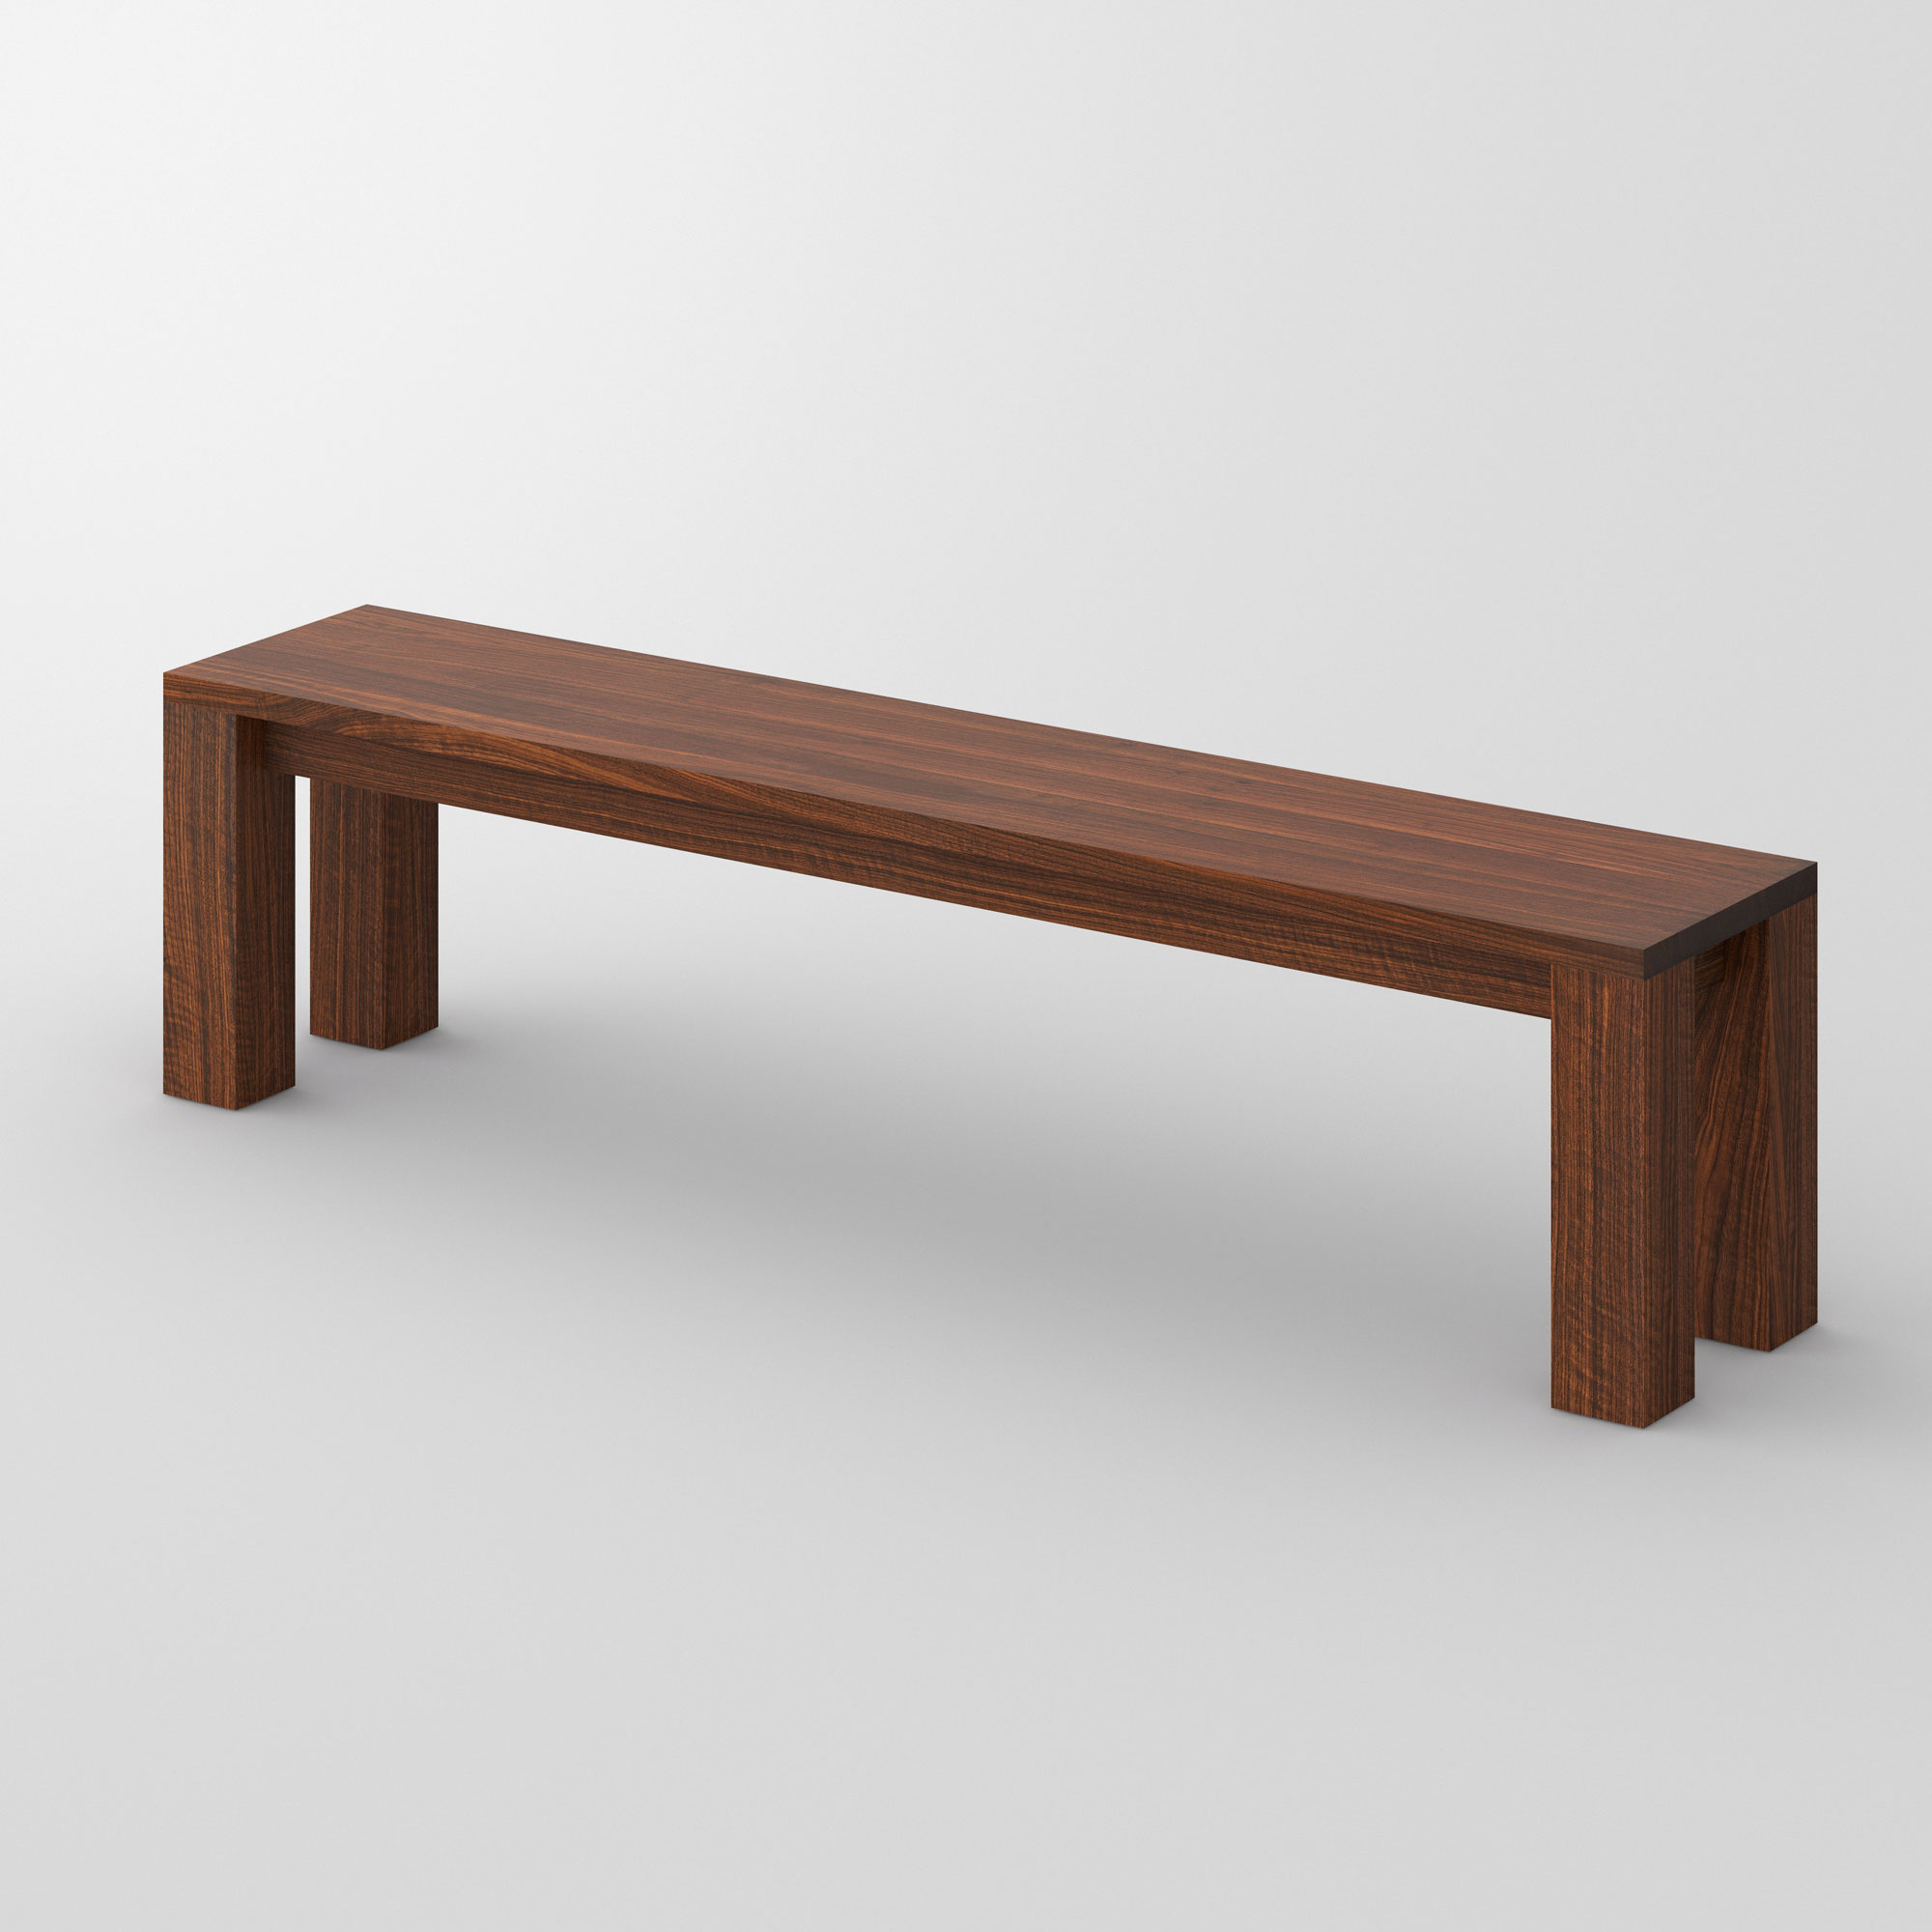 Rustic Wooden Bench CUBUS 3 cam1 custom made in solid wood by vitamin design